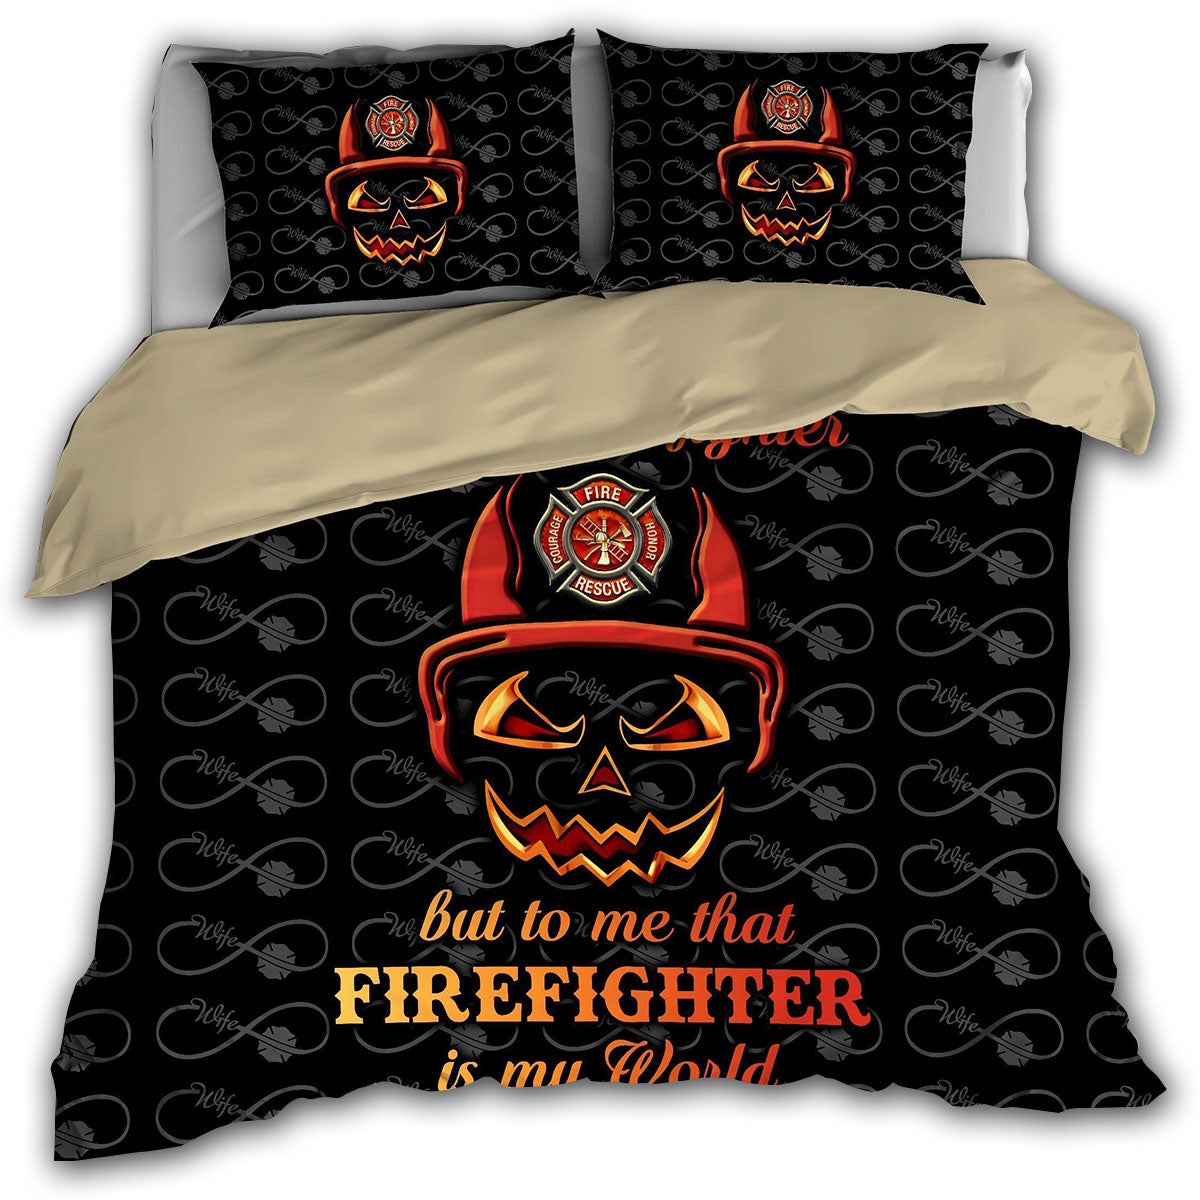 Firefighter Is My World - Bedding Cover - Owl Ohh - Owl Ohh